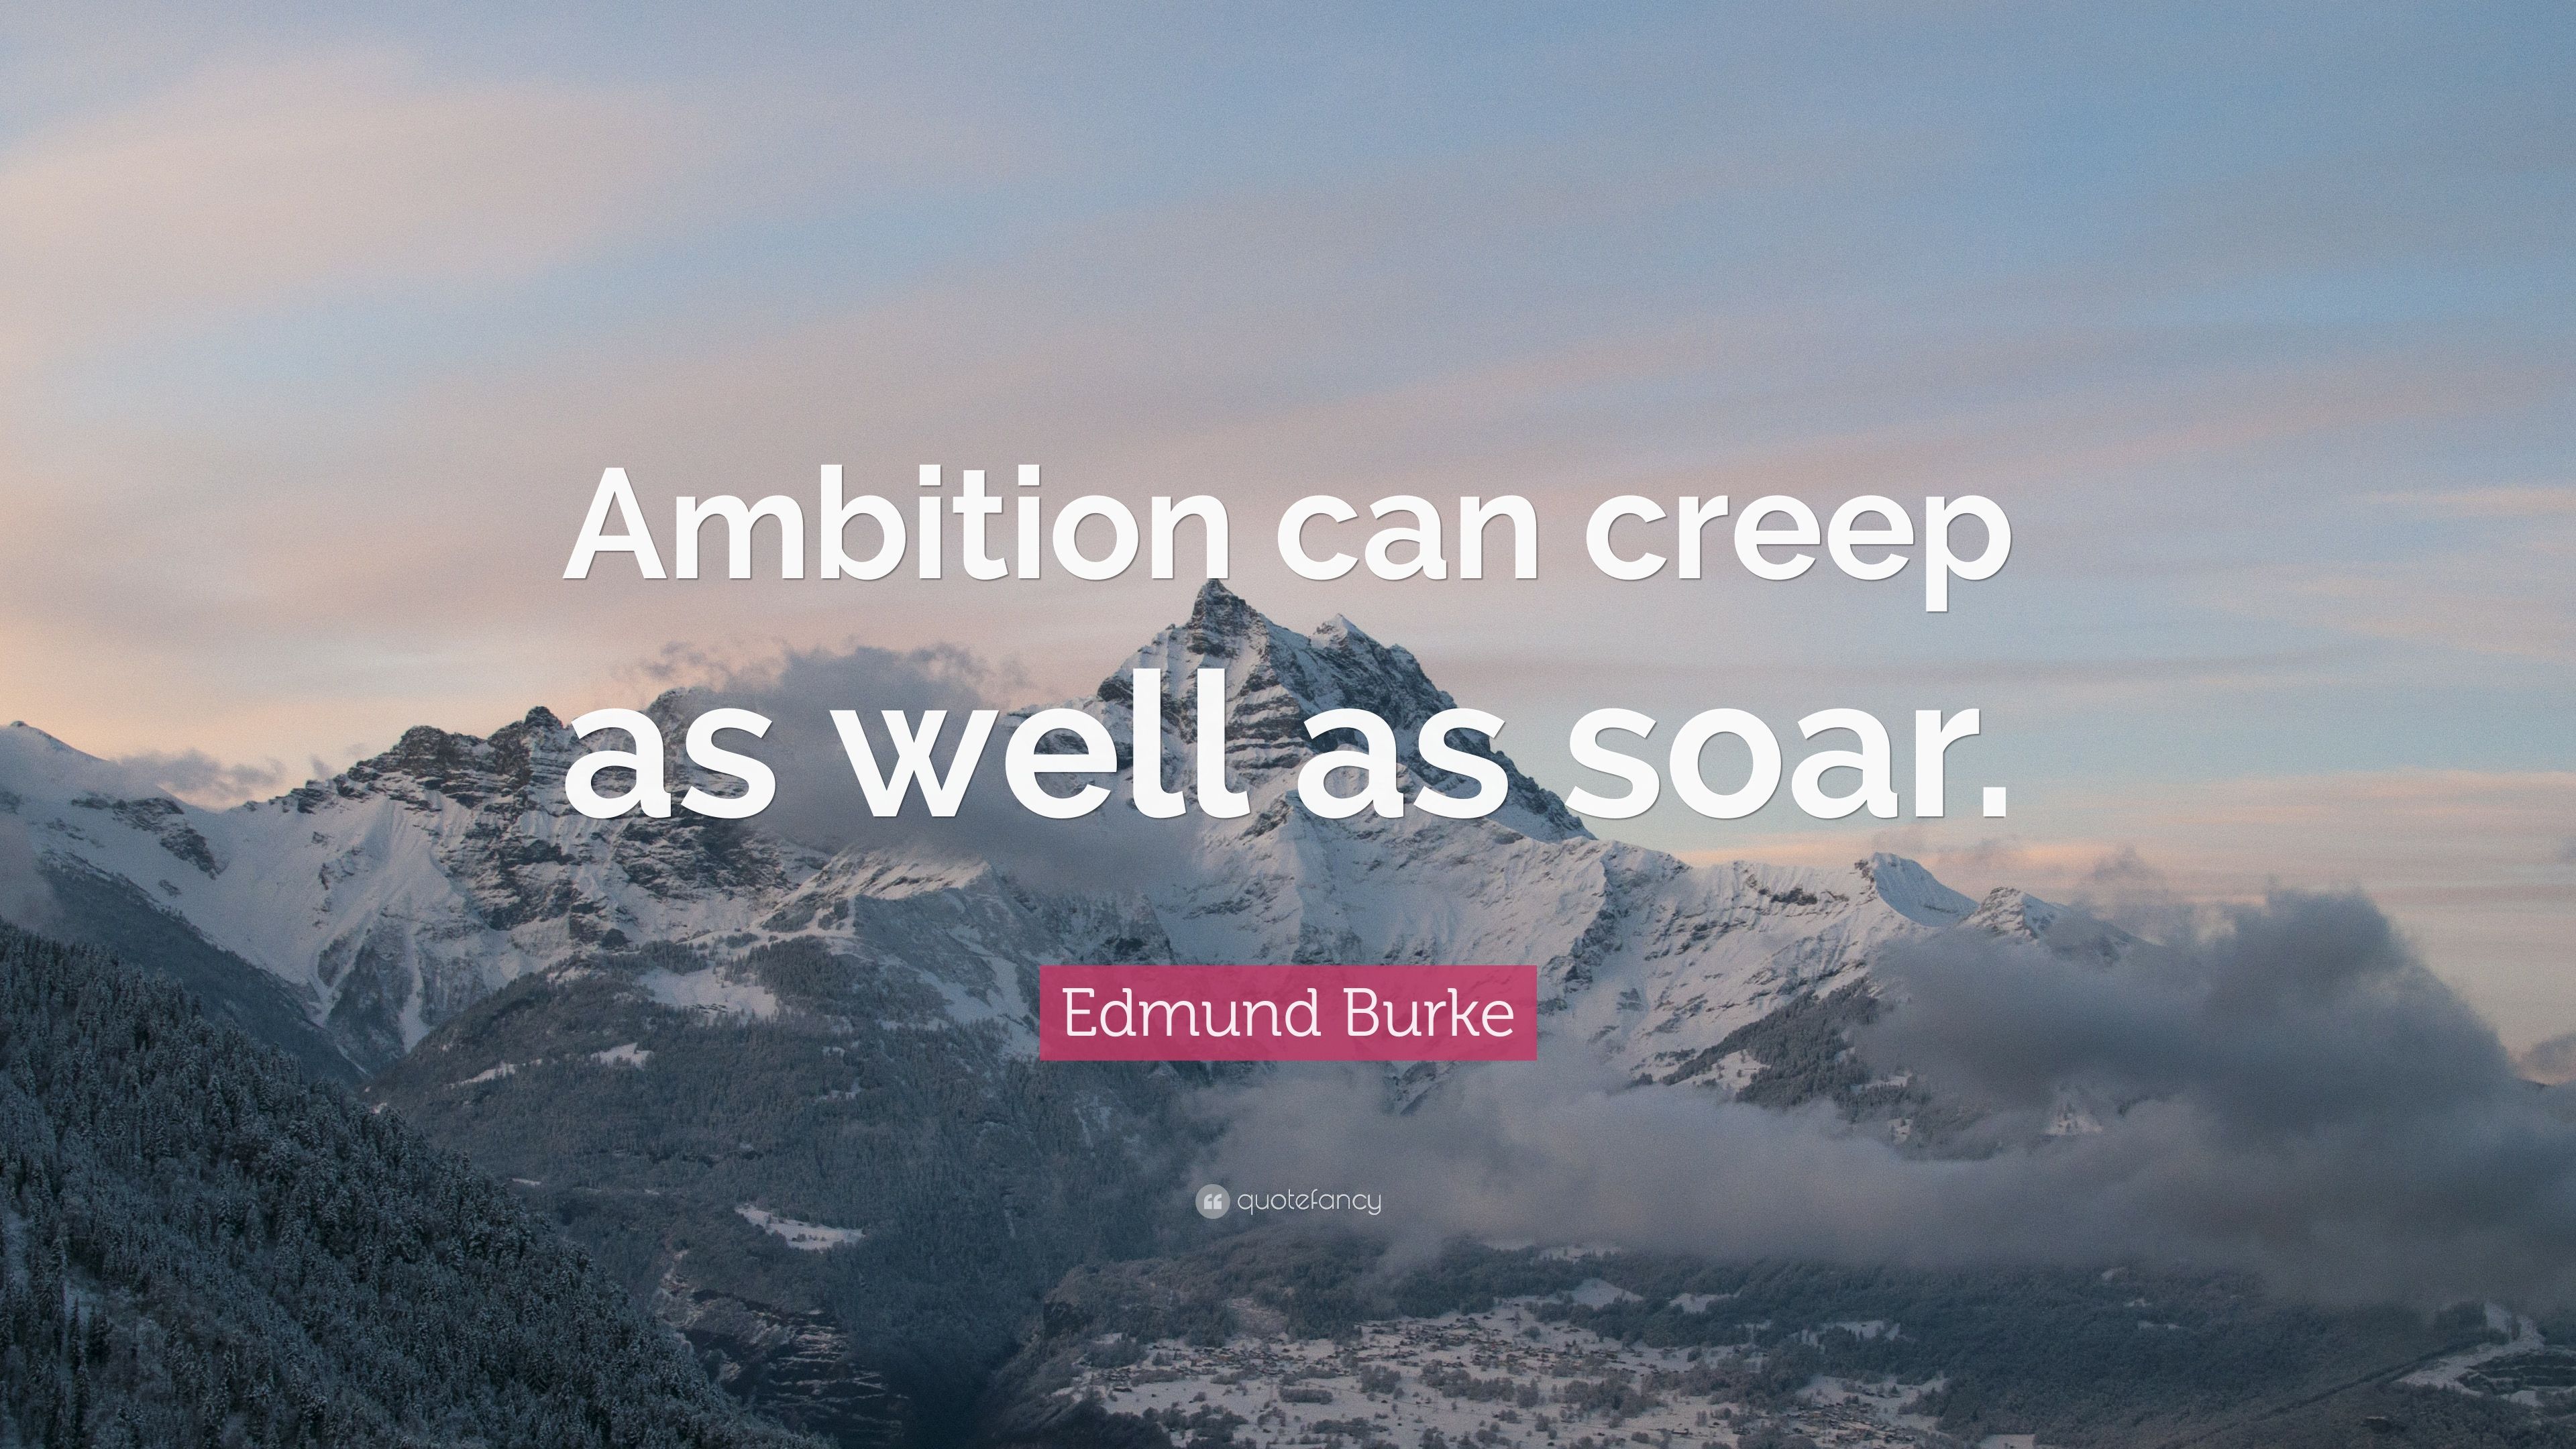 Edmund Burke Quote: “Ambition can creep as well as soar.” 9